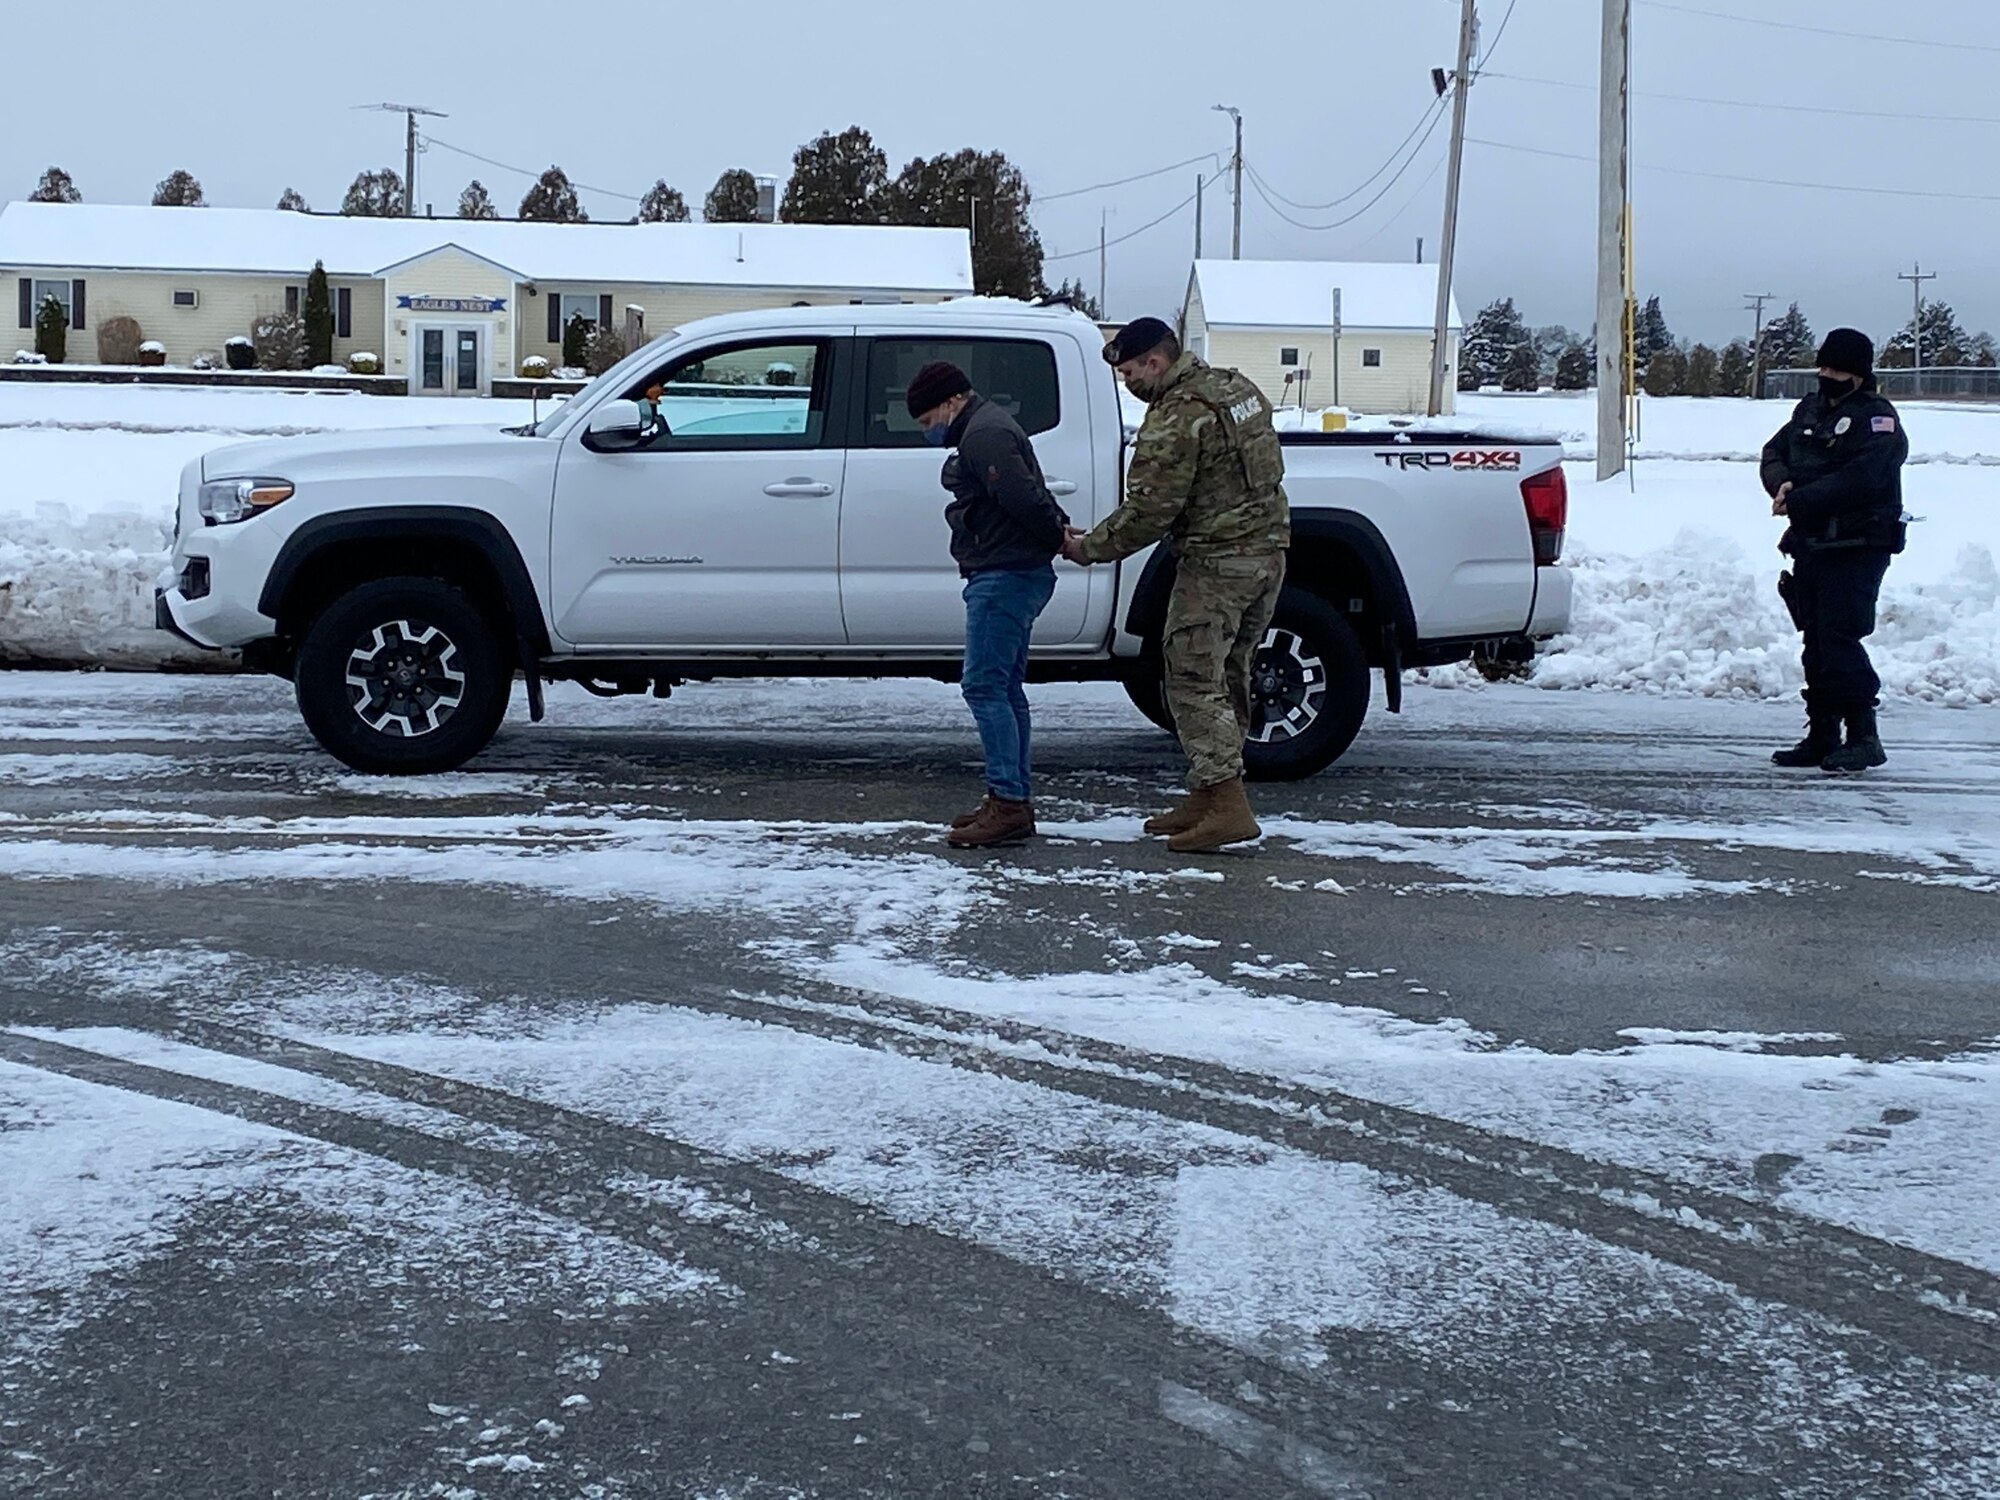 Photo of the "perpetrator", 102 IW Director of Inspections, Mr. Scott Etler, was hand-cuffed and both he and his vehicle were searched by Patrolman Staff Sgt. Erik Madden. Providing backup was Entry Controller Mr. Christopher Hankins.